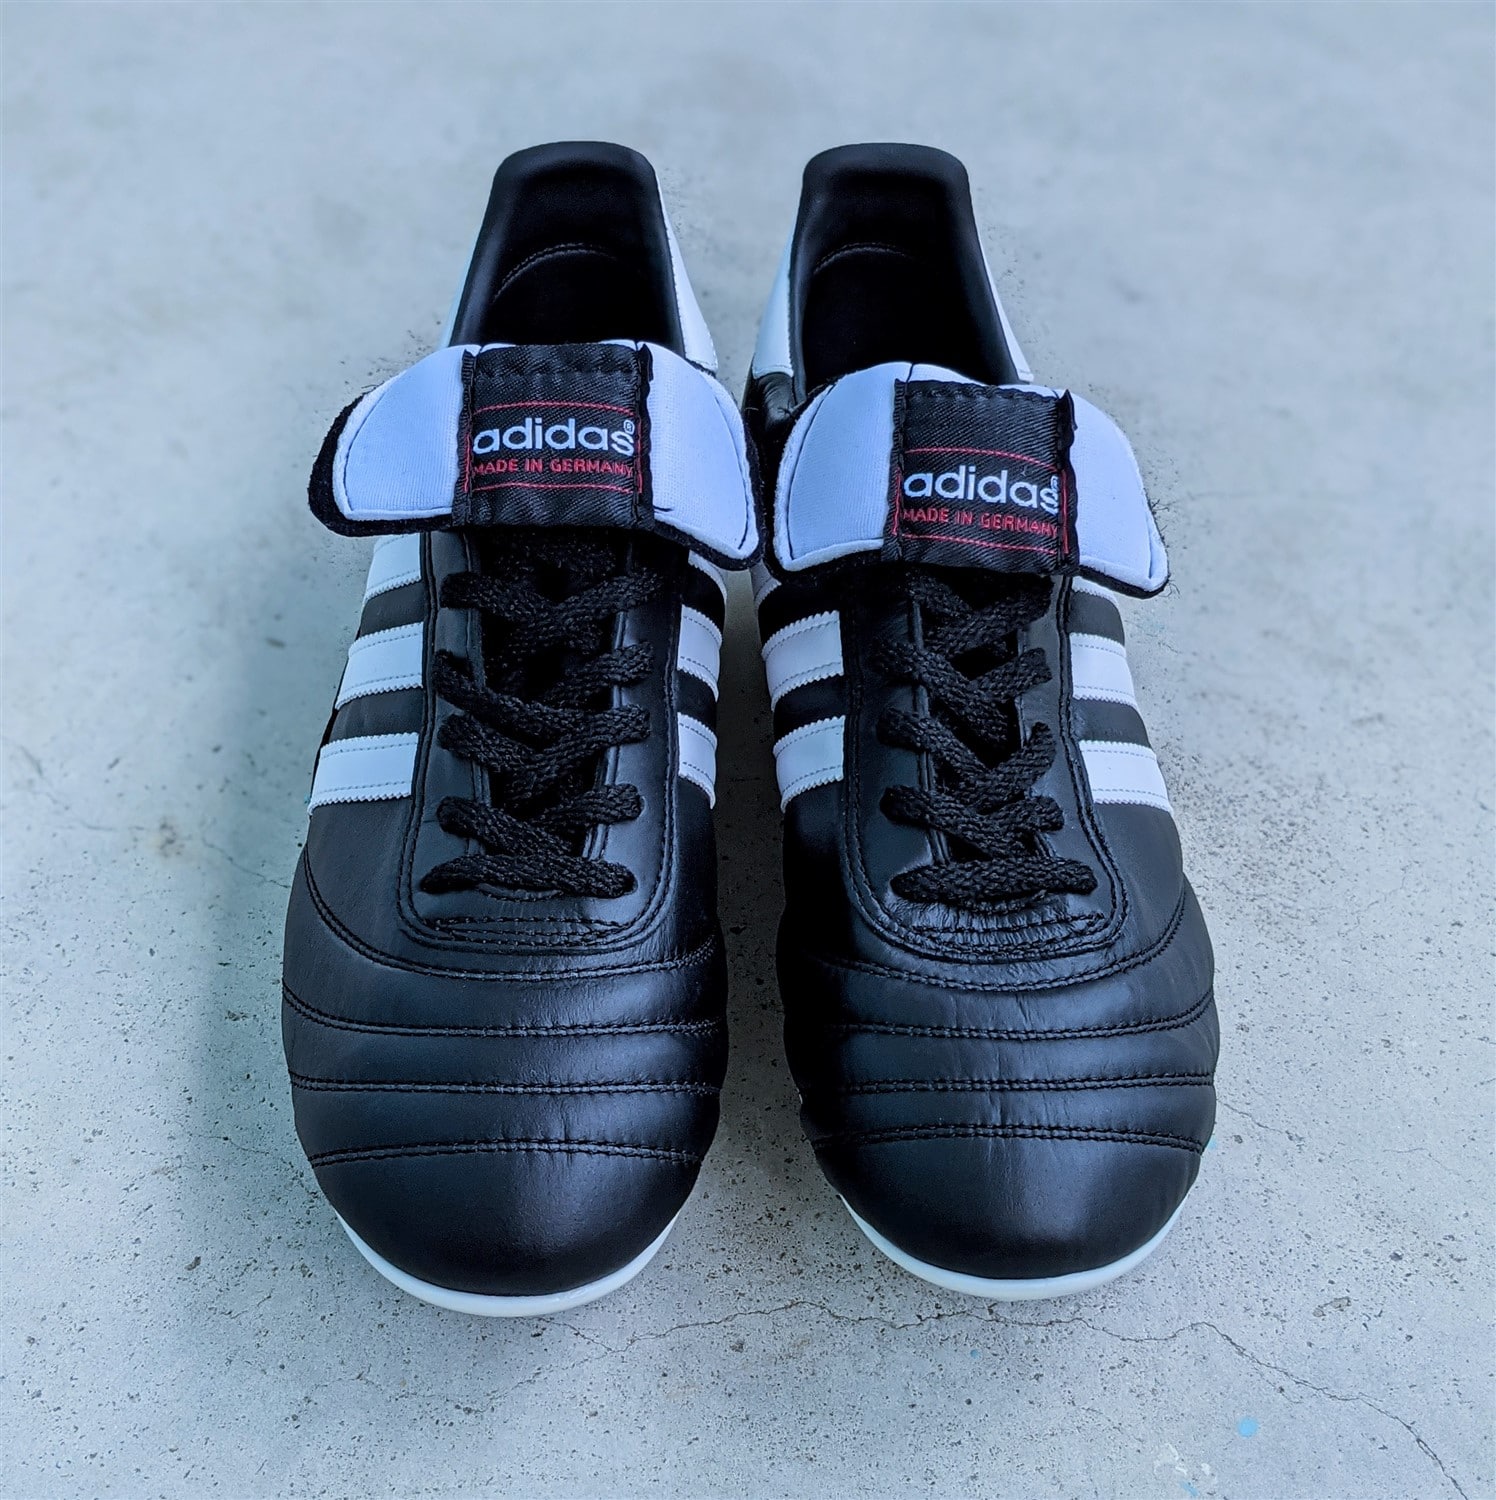 adidas Copa Mundial football boots soccer cleats